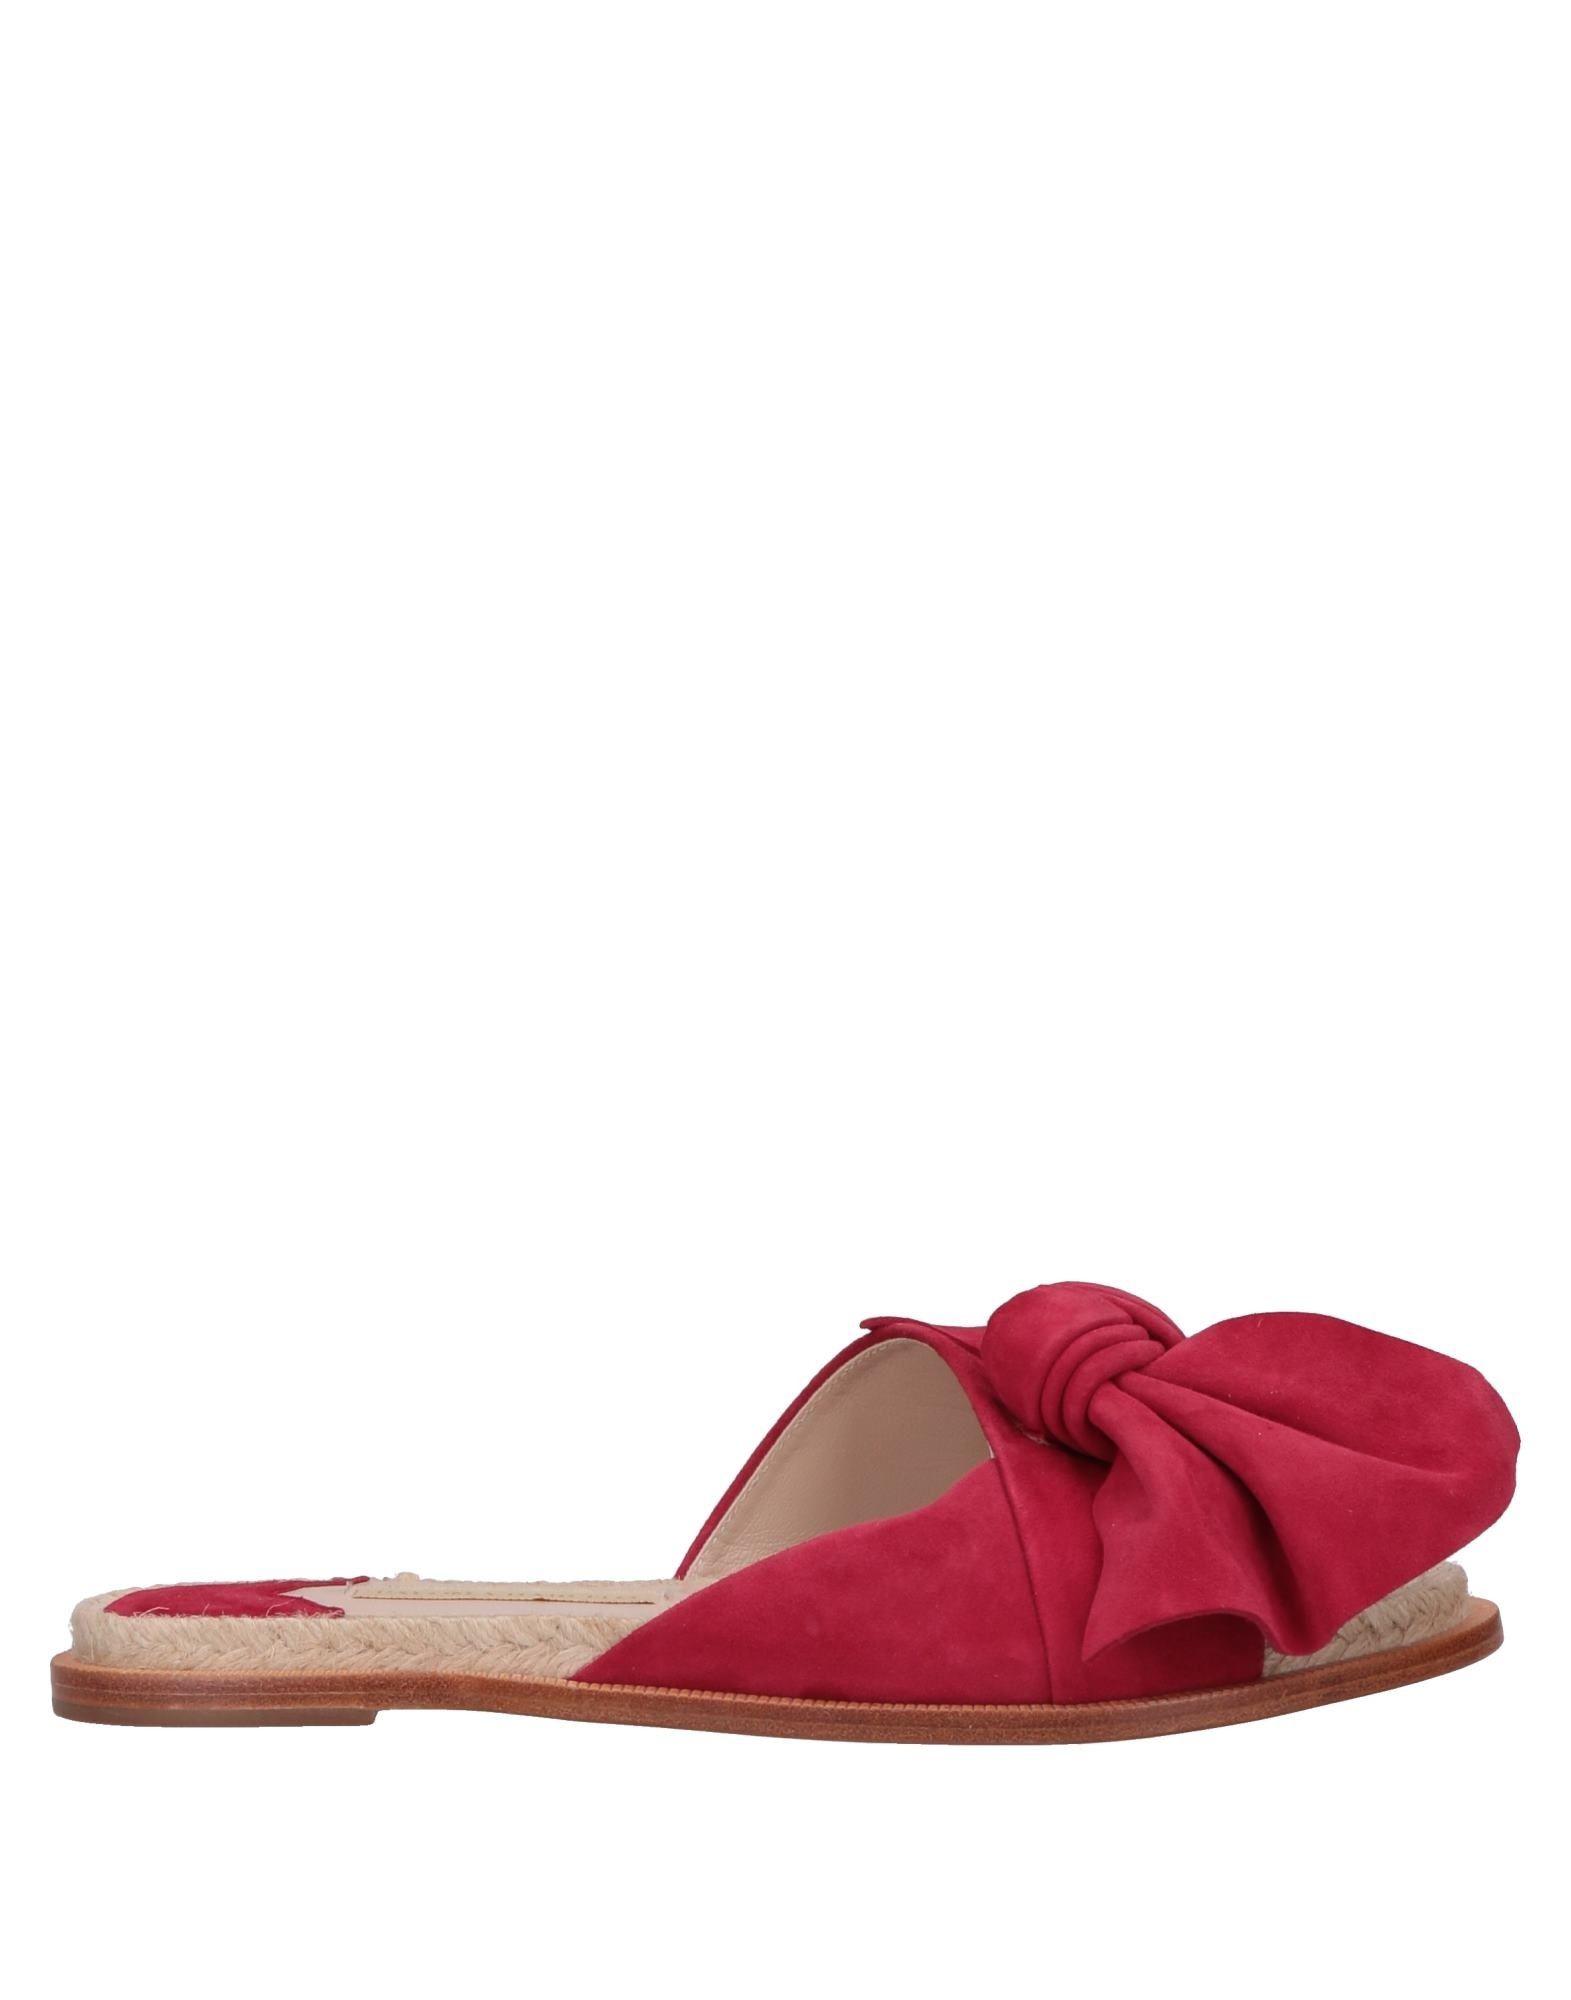 Paloma Barceló Suede Sandals in Red - Save 38% - Lyst